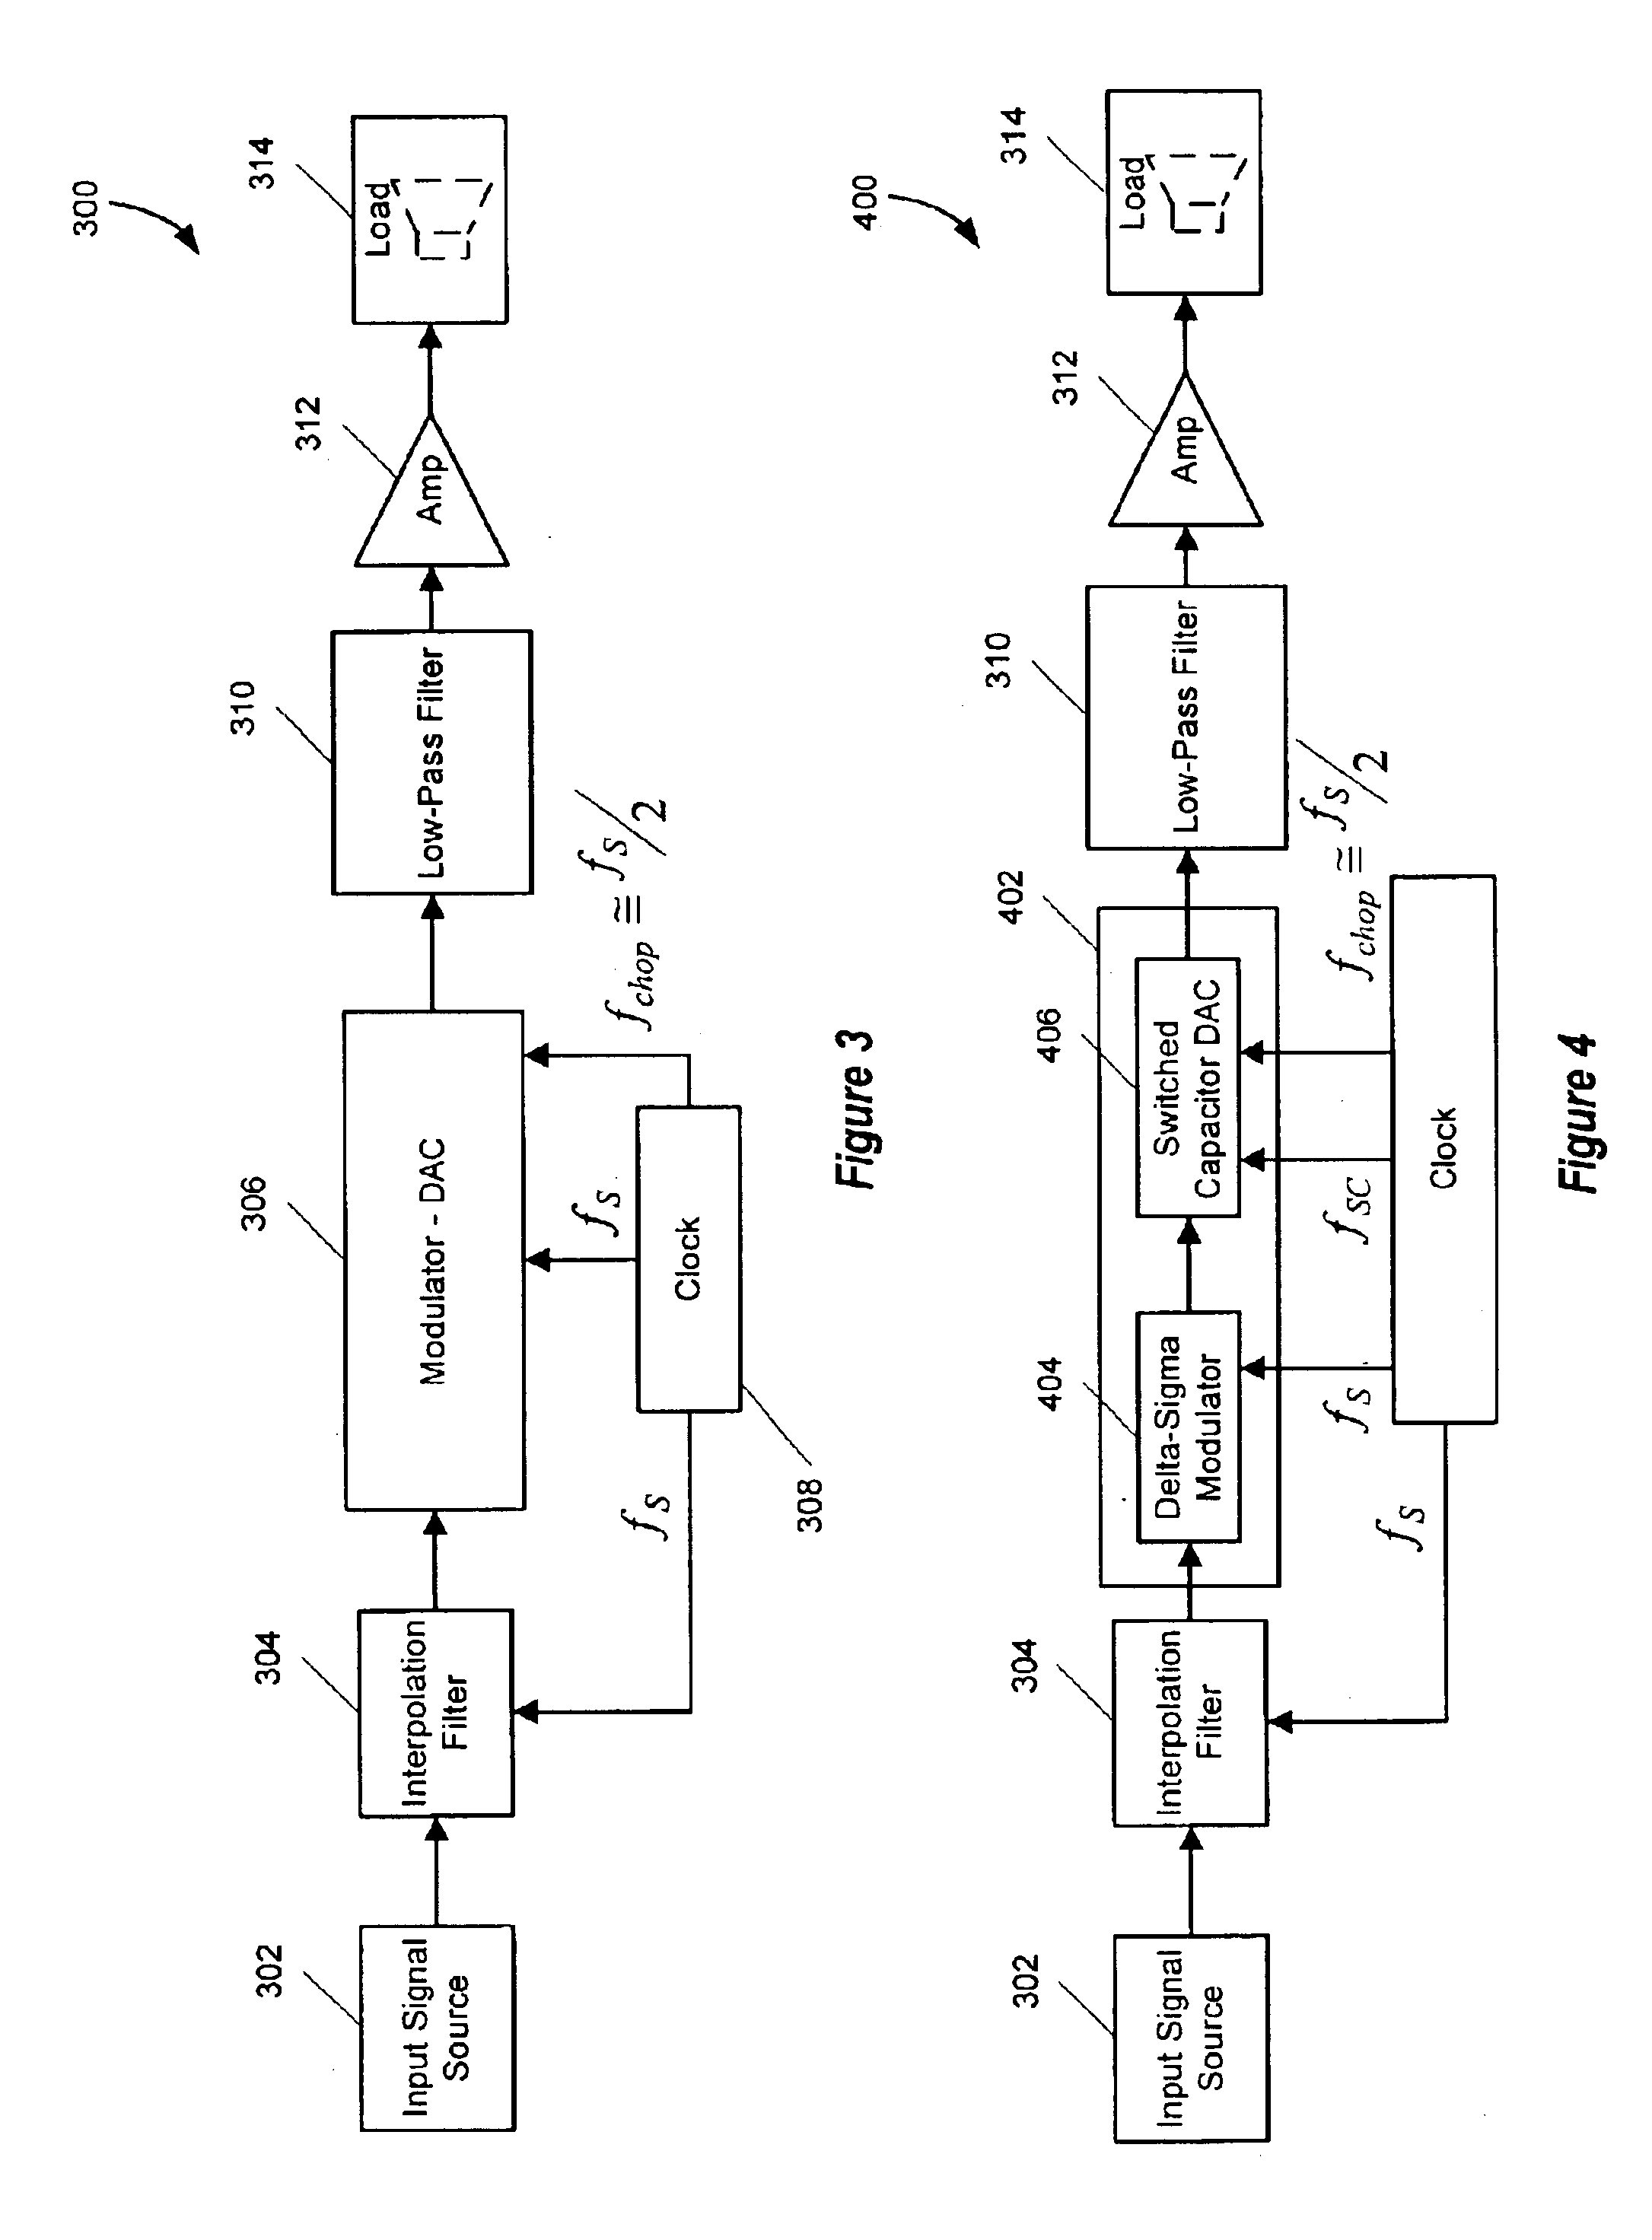 Signal processing system with baseband noise modulation and noise fold back reduction